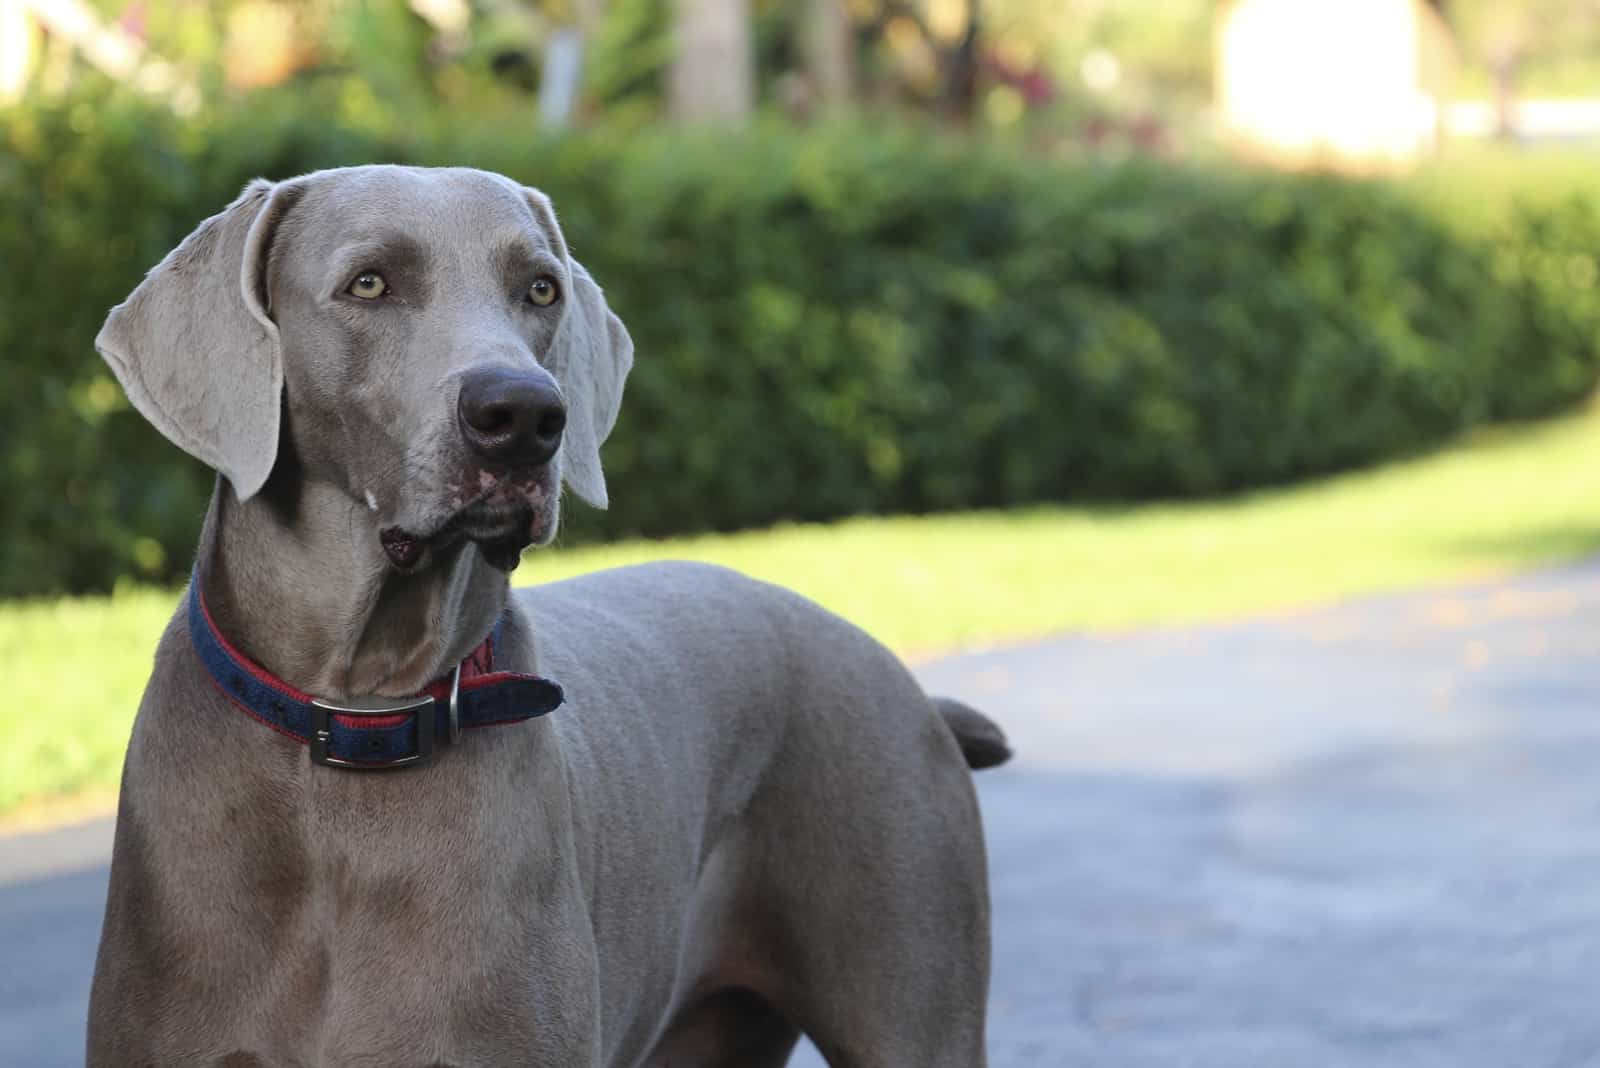 Weimaraner dog in grey color looking to his side with curiosity.